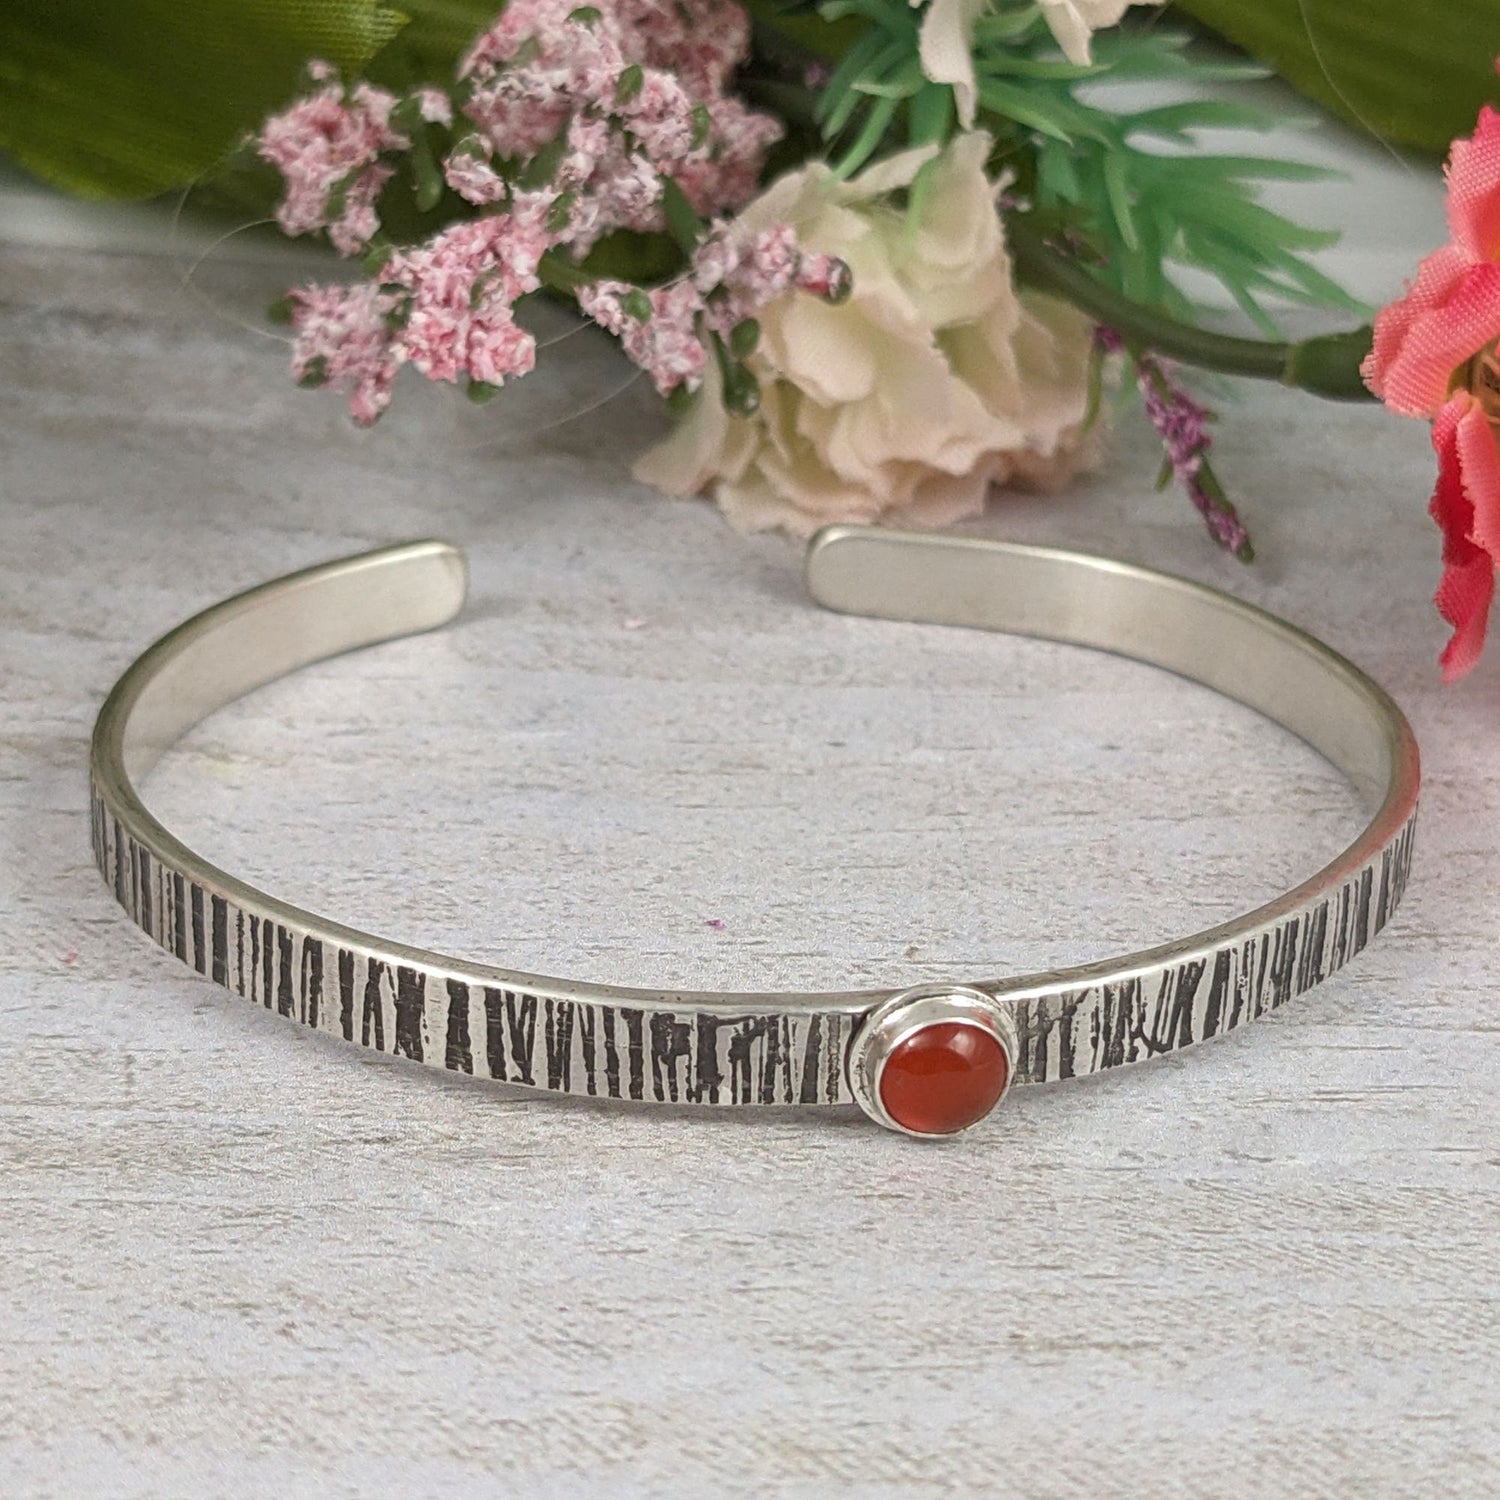 Sterling silver cuff bracelet. The narrow rectangular bracelet has a random lines texture that is oxidized to darken the design. In the middle is an orange carnelian gemstone. The gemstone is round on top. Staged with flowers in the background.